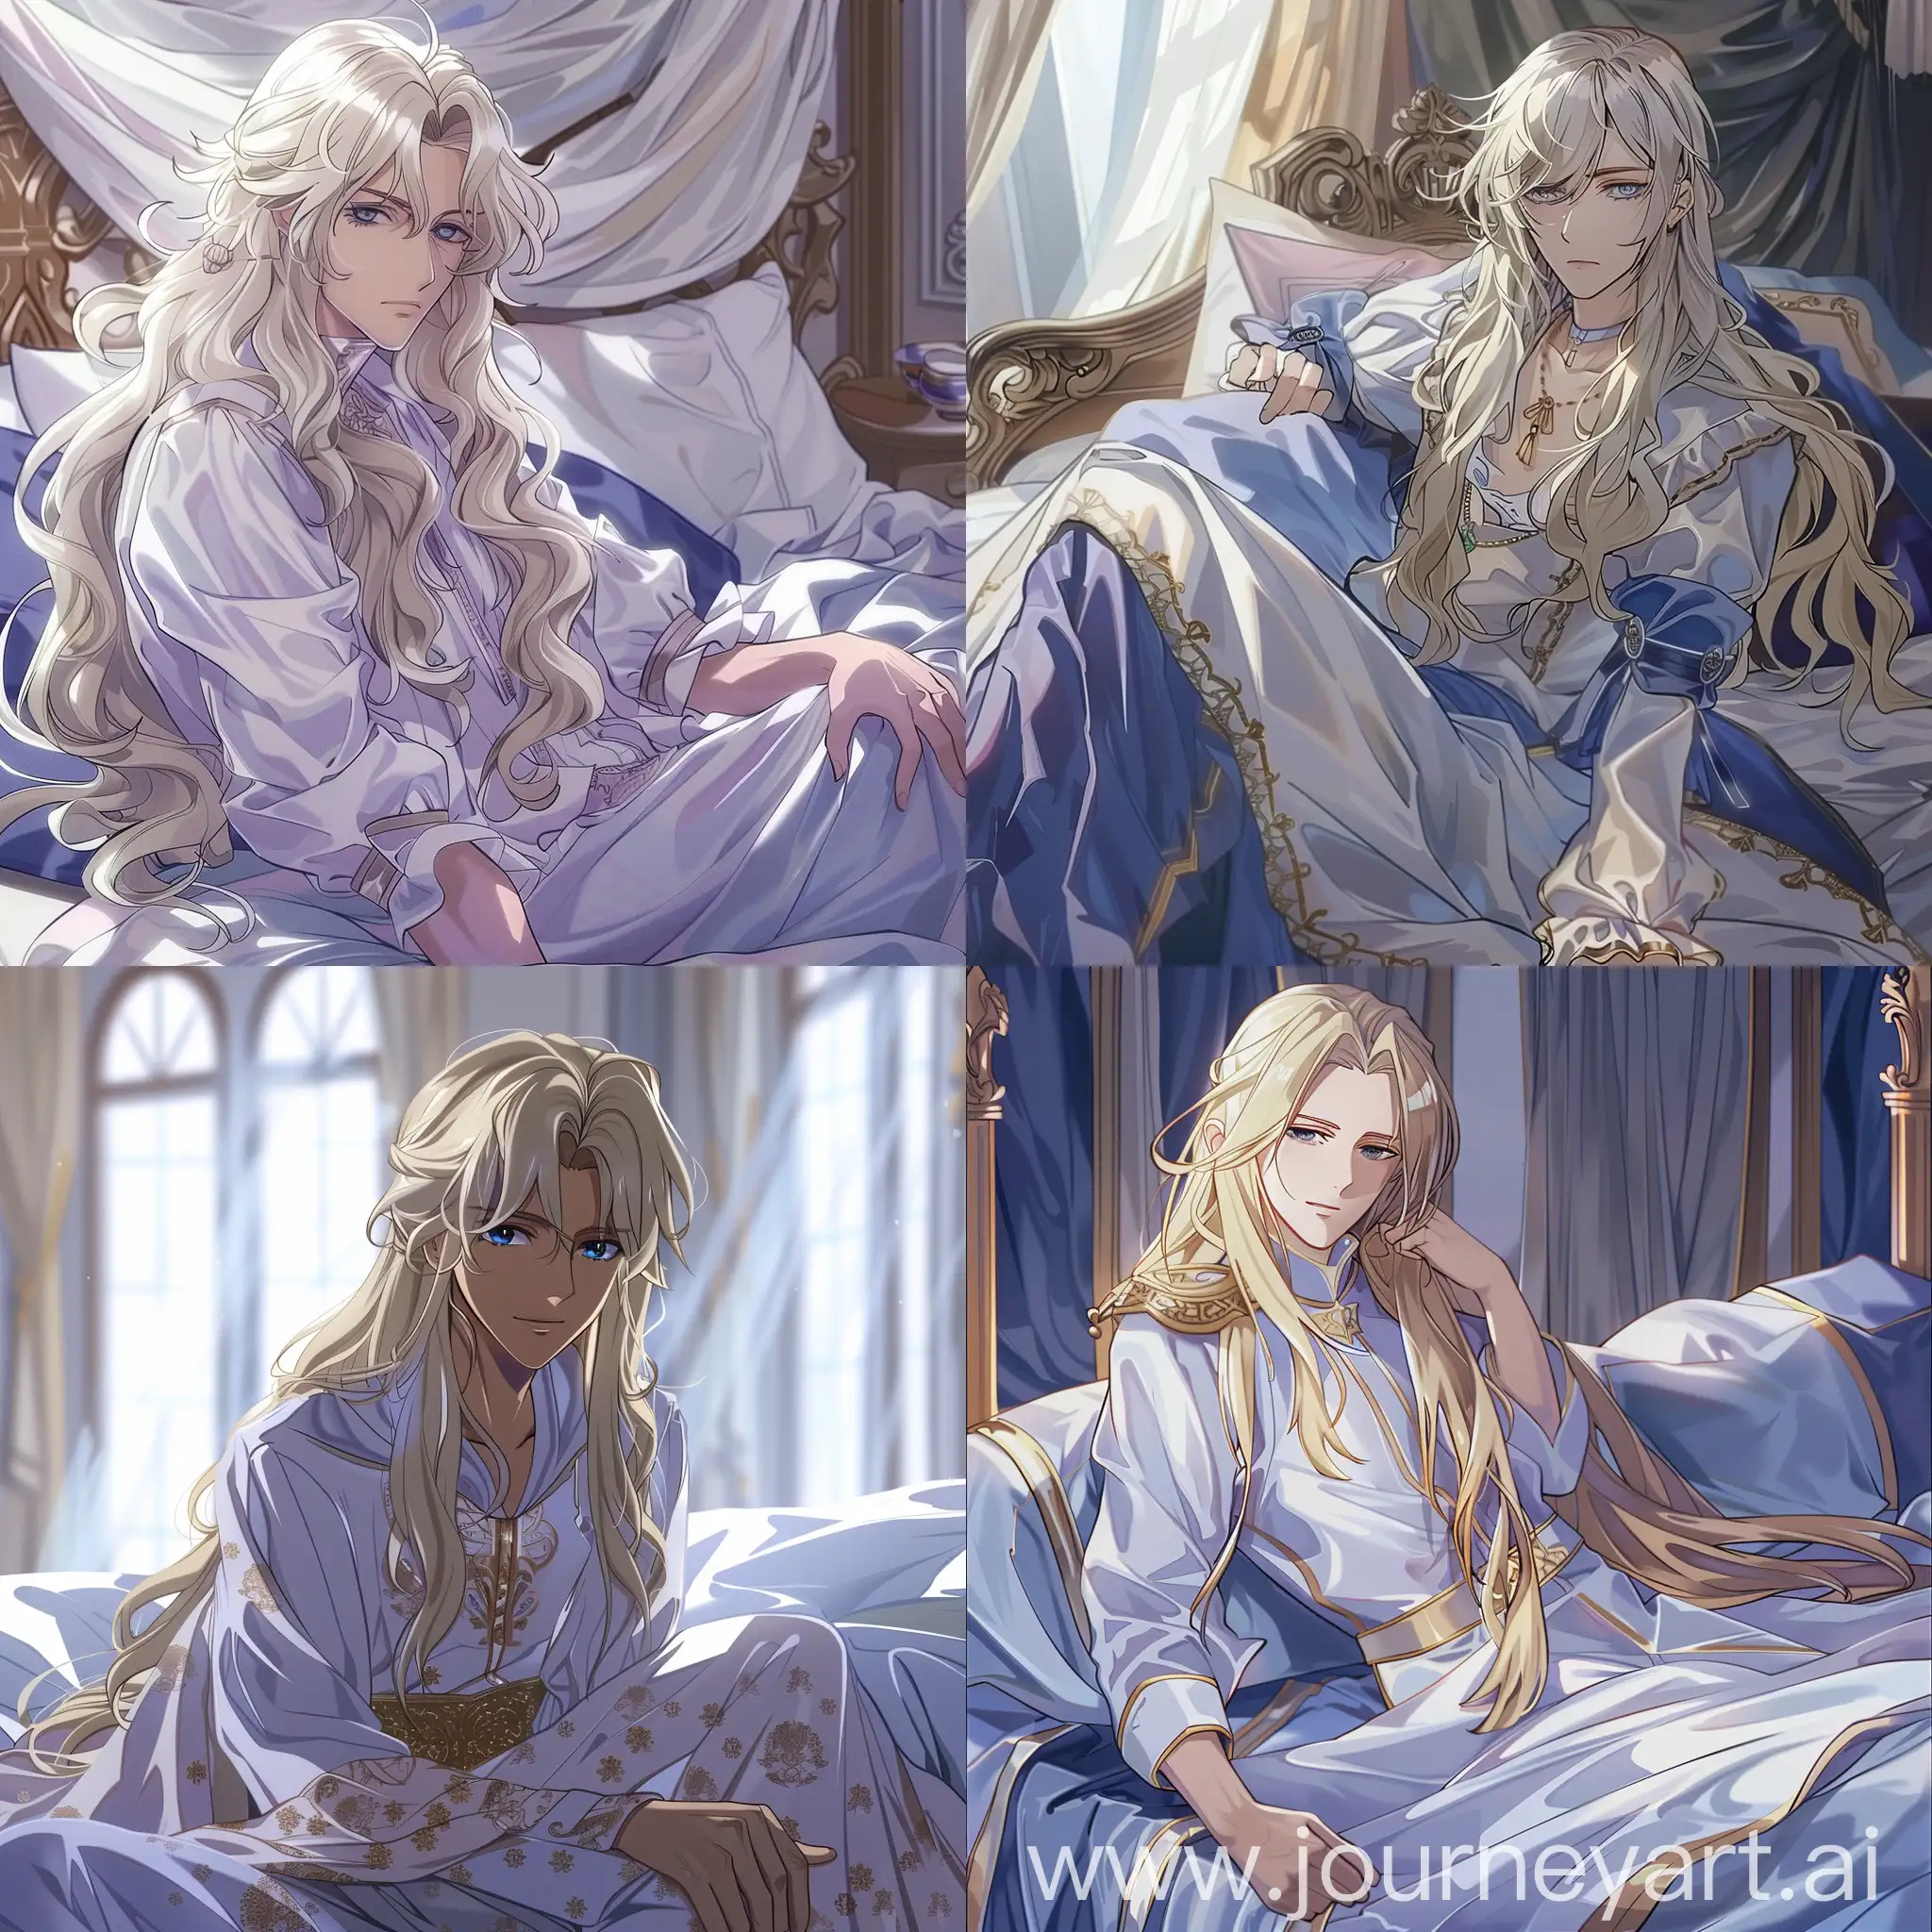 Elegant-Blonde-Young-Man-in-Royal-Female-Dress-on-Bed-Anime-Style